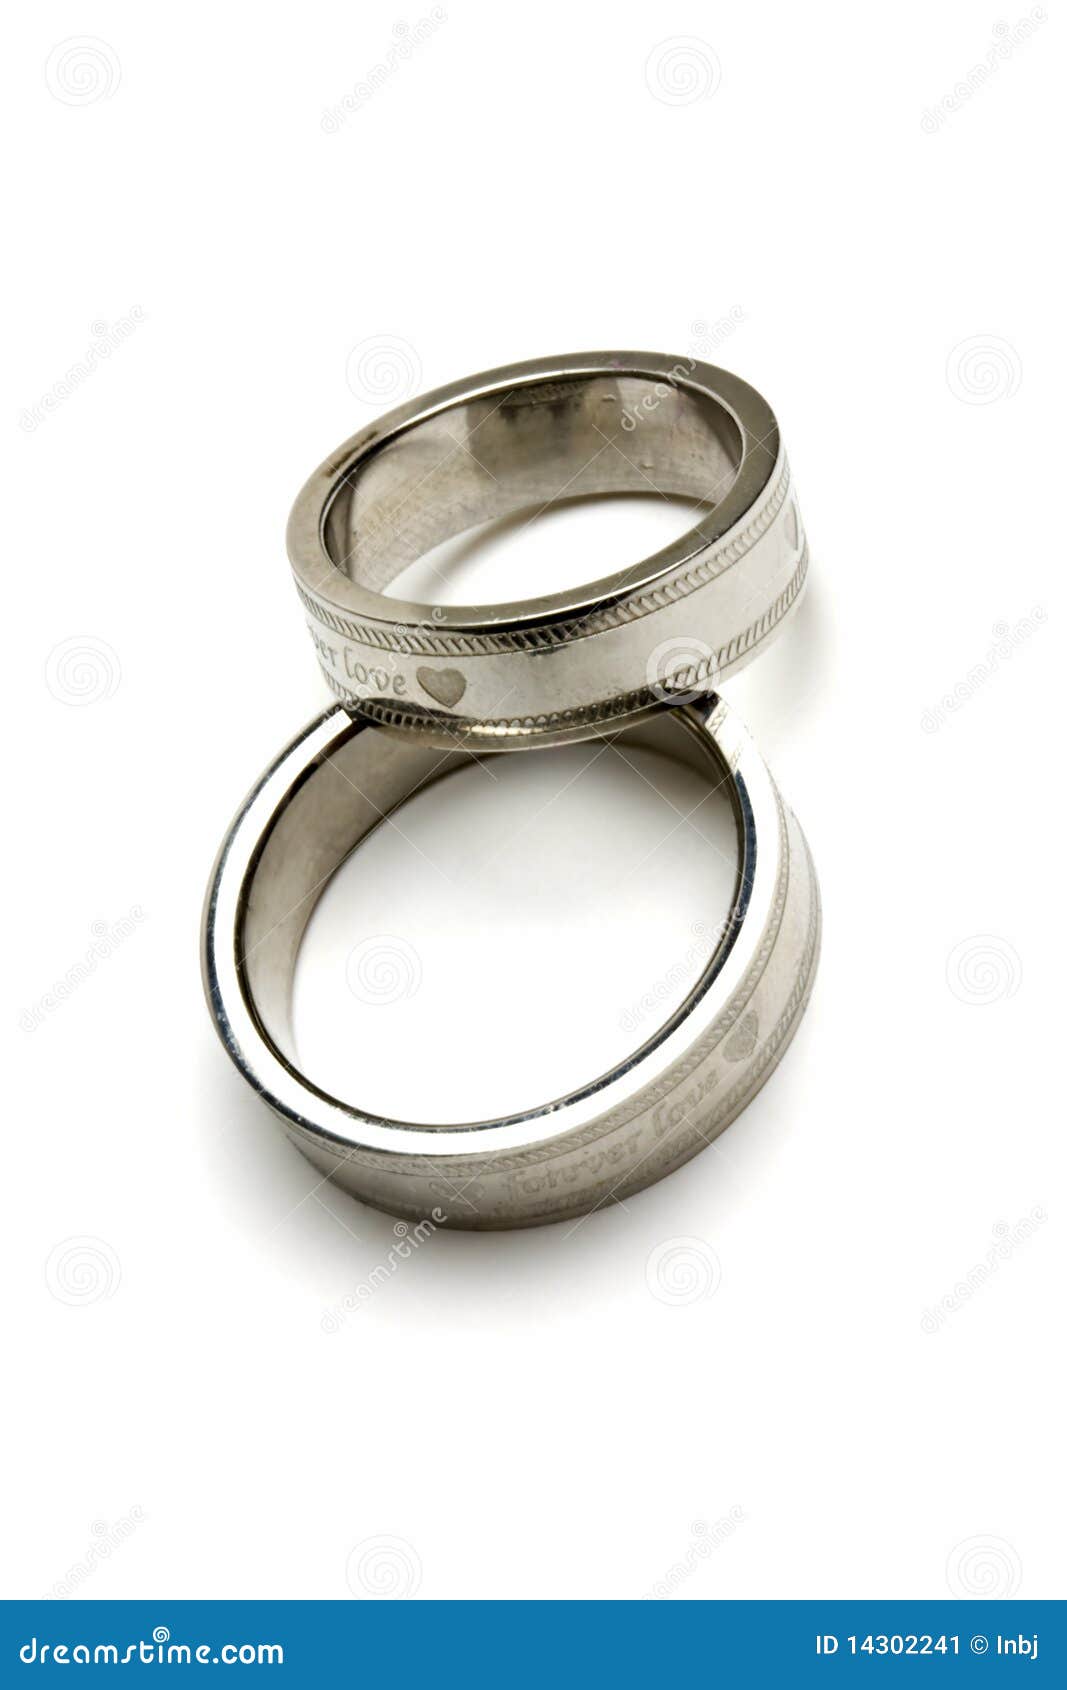 Pair of wedding rings isolated on white.